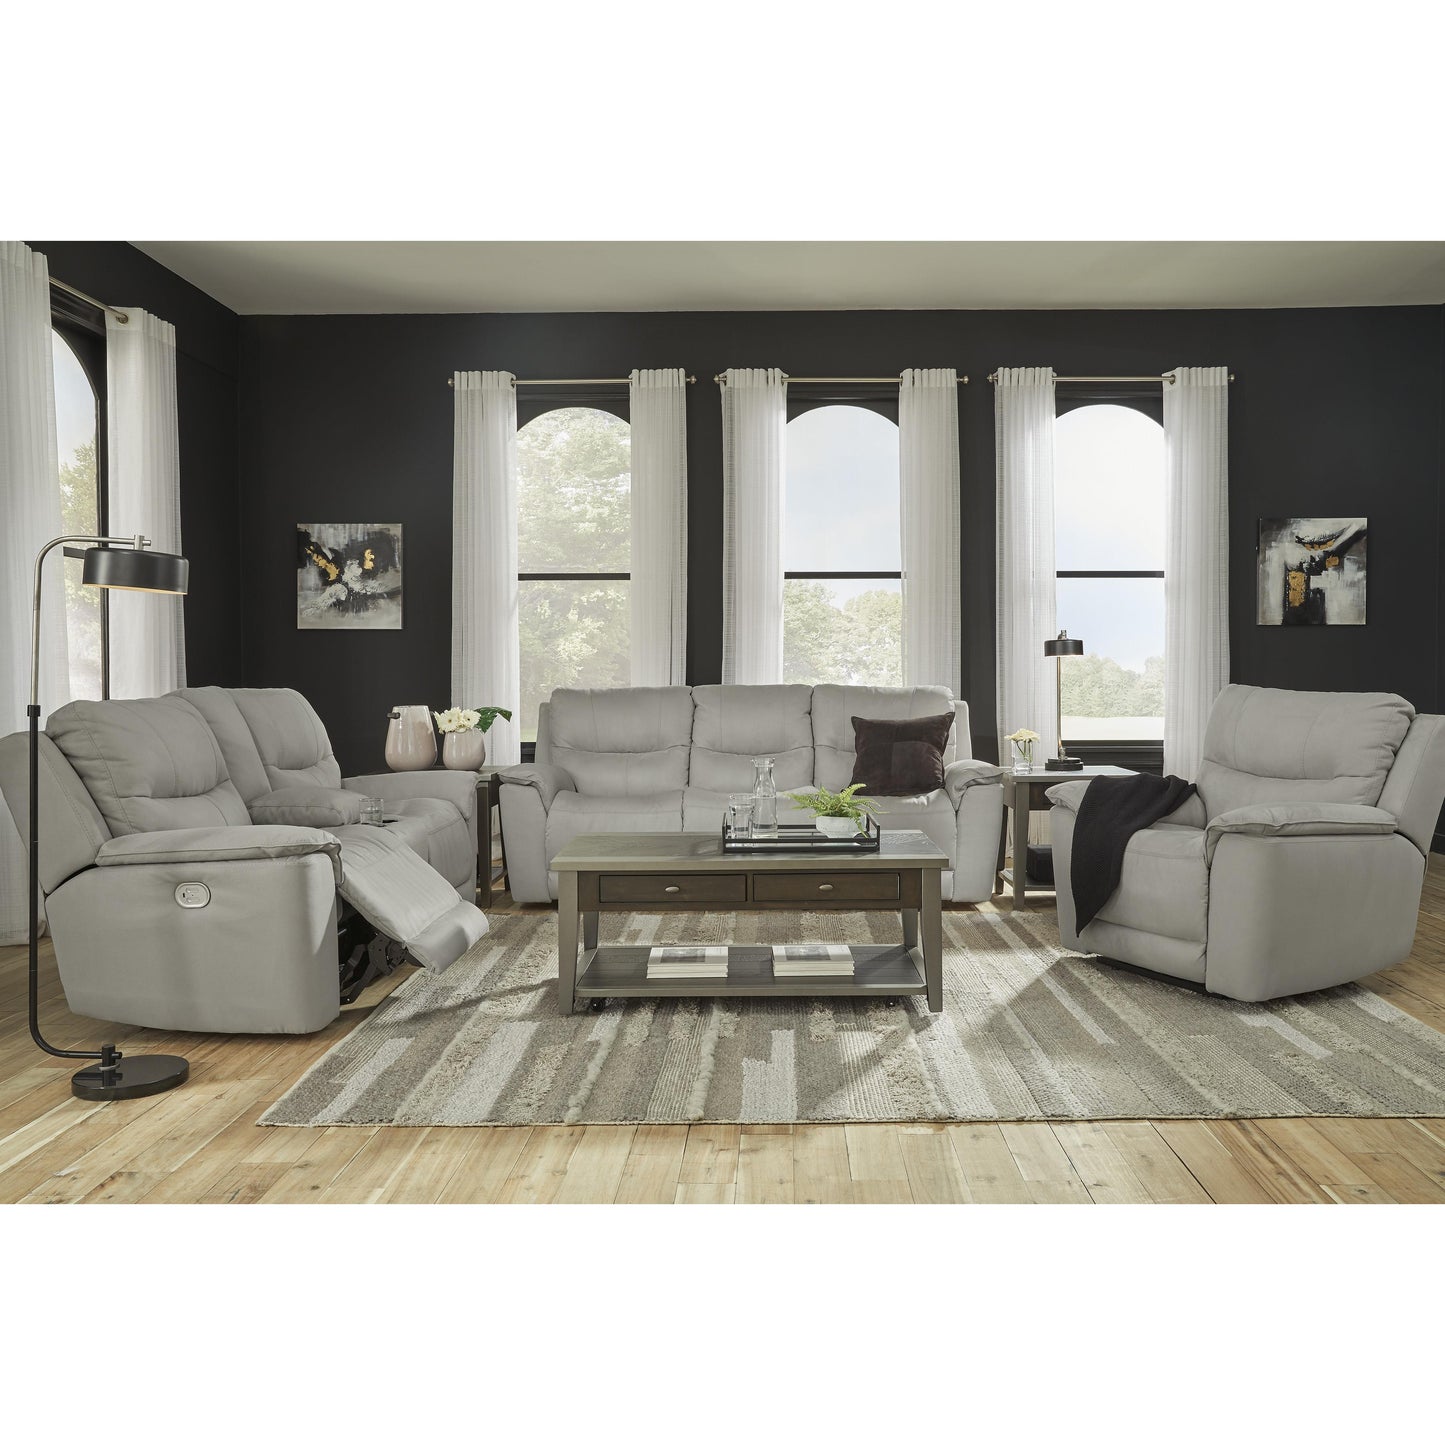 Signature Design by Ashley Next-Gen Gaucho Power Reclining Leather Look Sofa 6080615 IMAGE 9